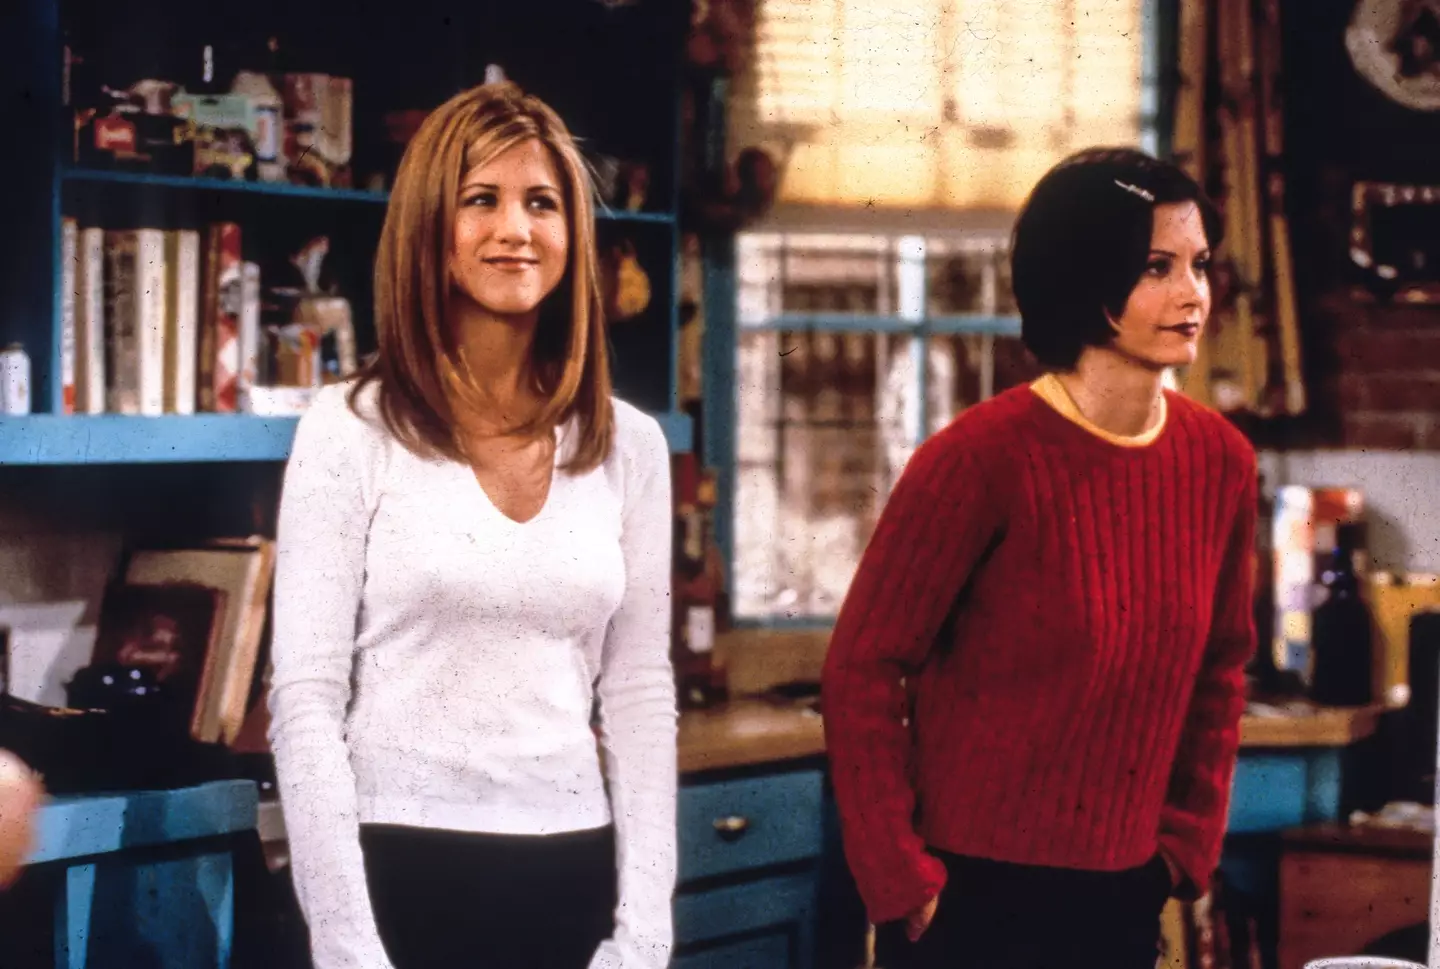 Aniston has spoken out about the negative 'attitude' of another actor on the set of 'Friends'.